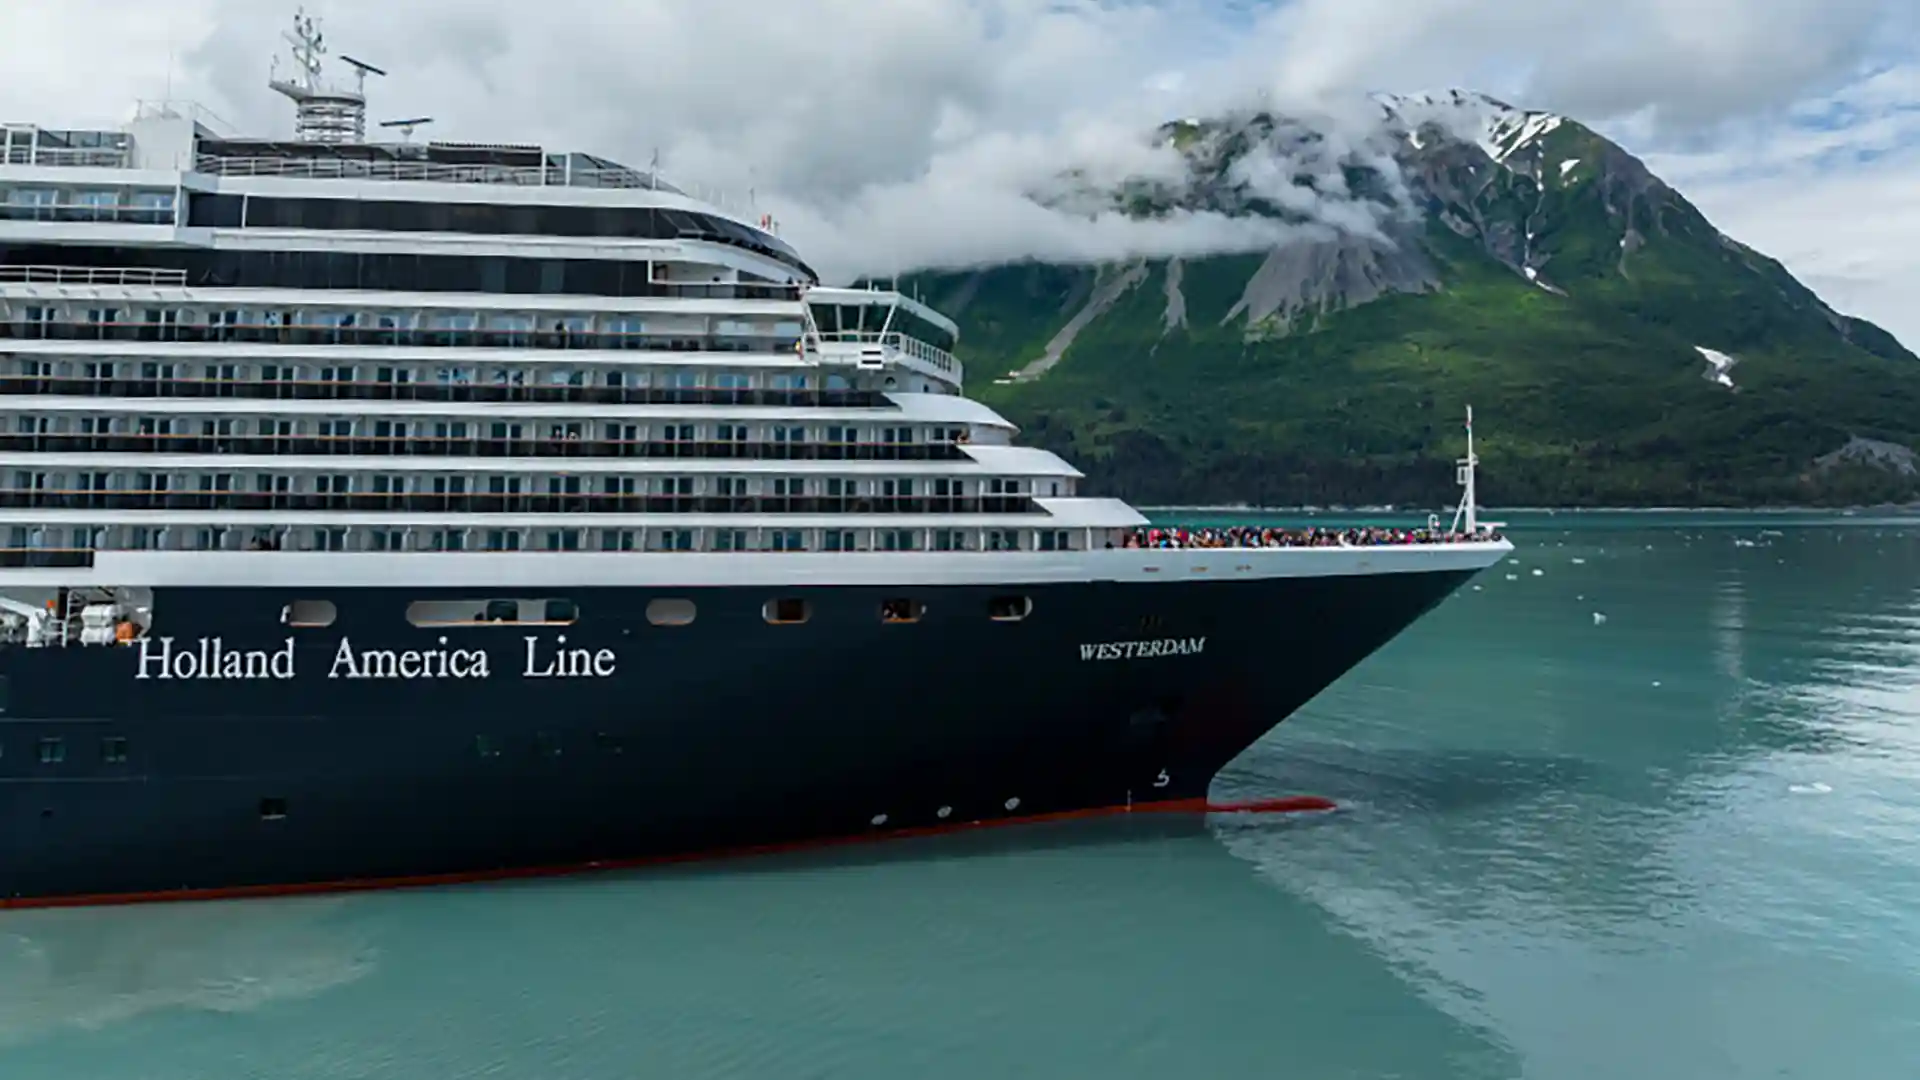 View of Holland America Line cruise ship in Alaska.